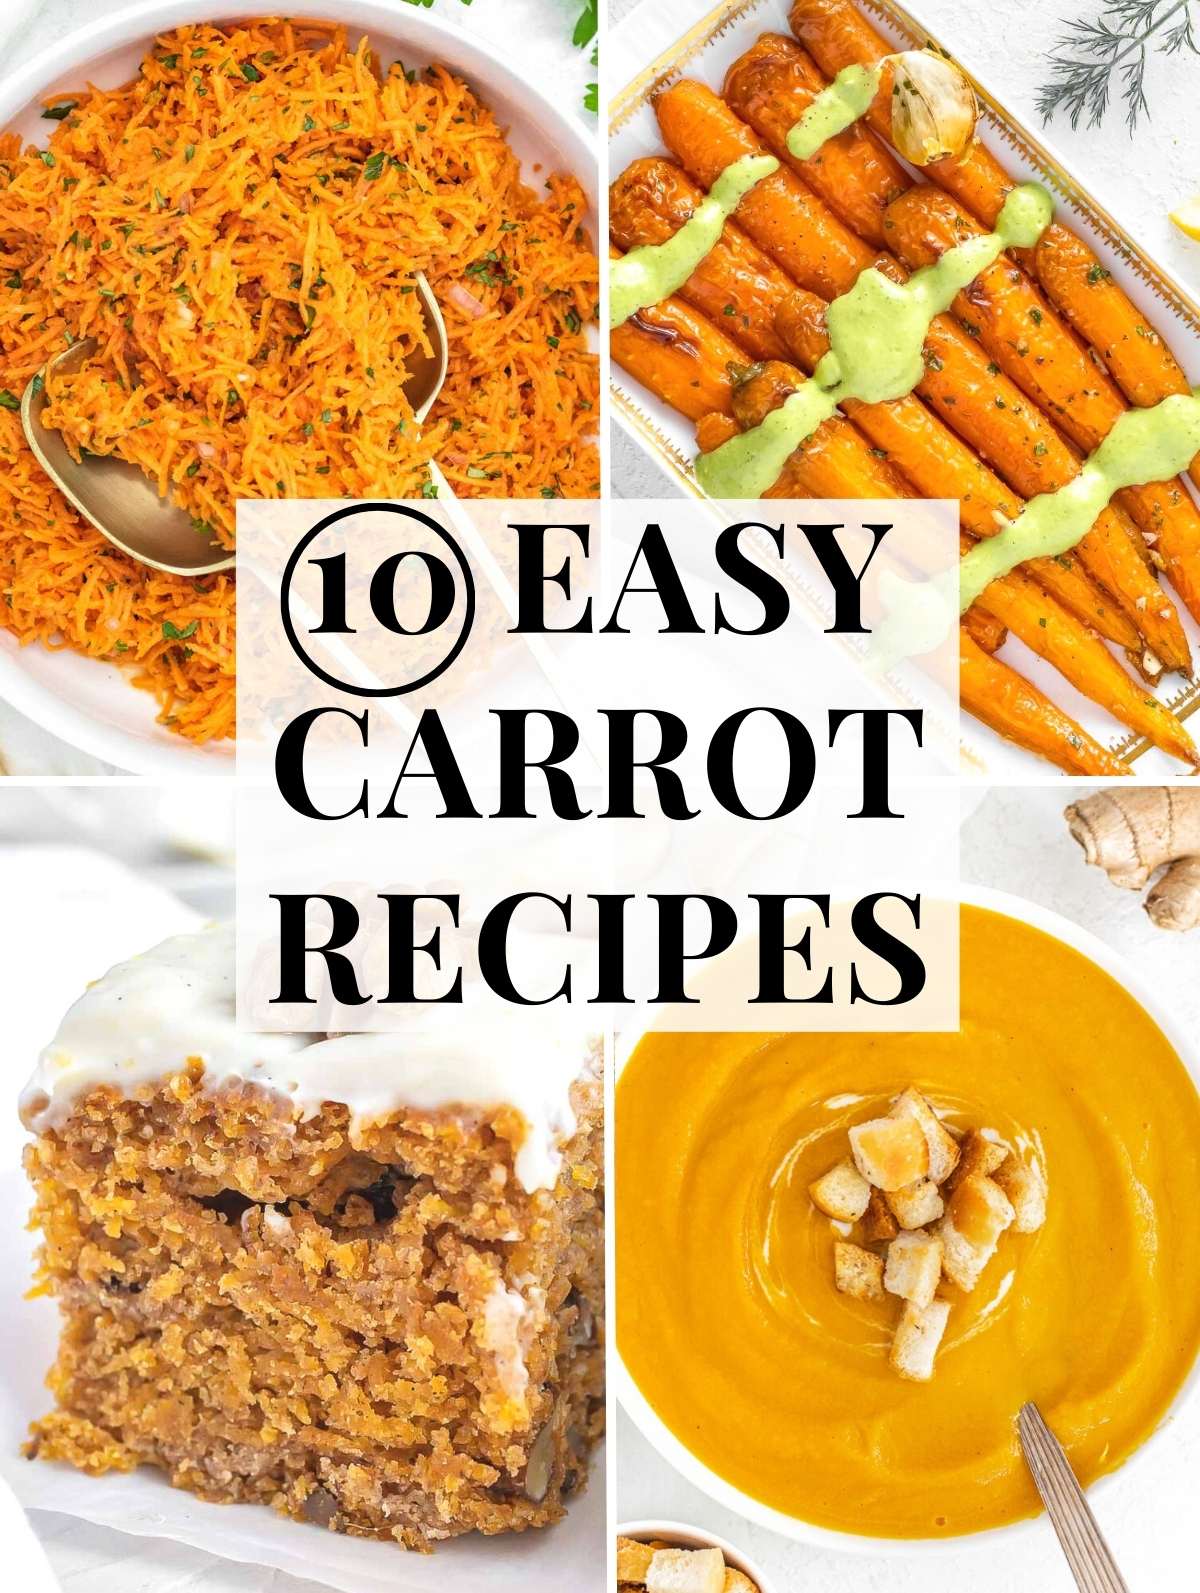 Easy carrot recipes with cake, salads and soups